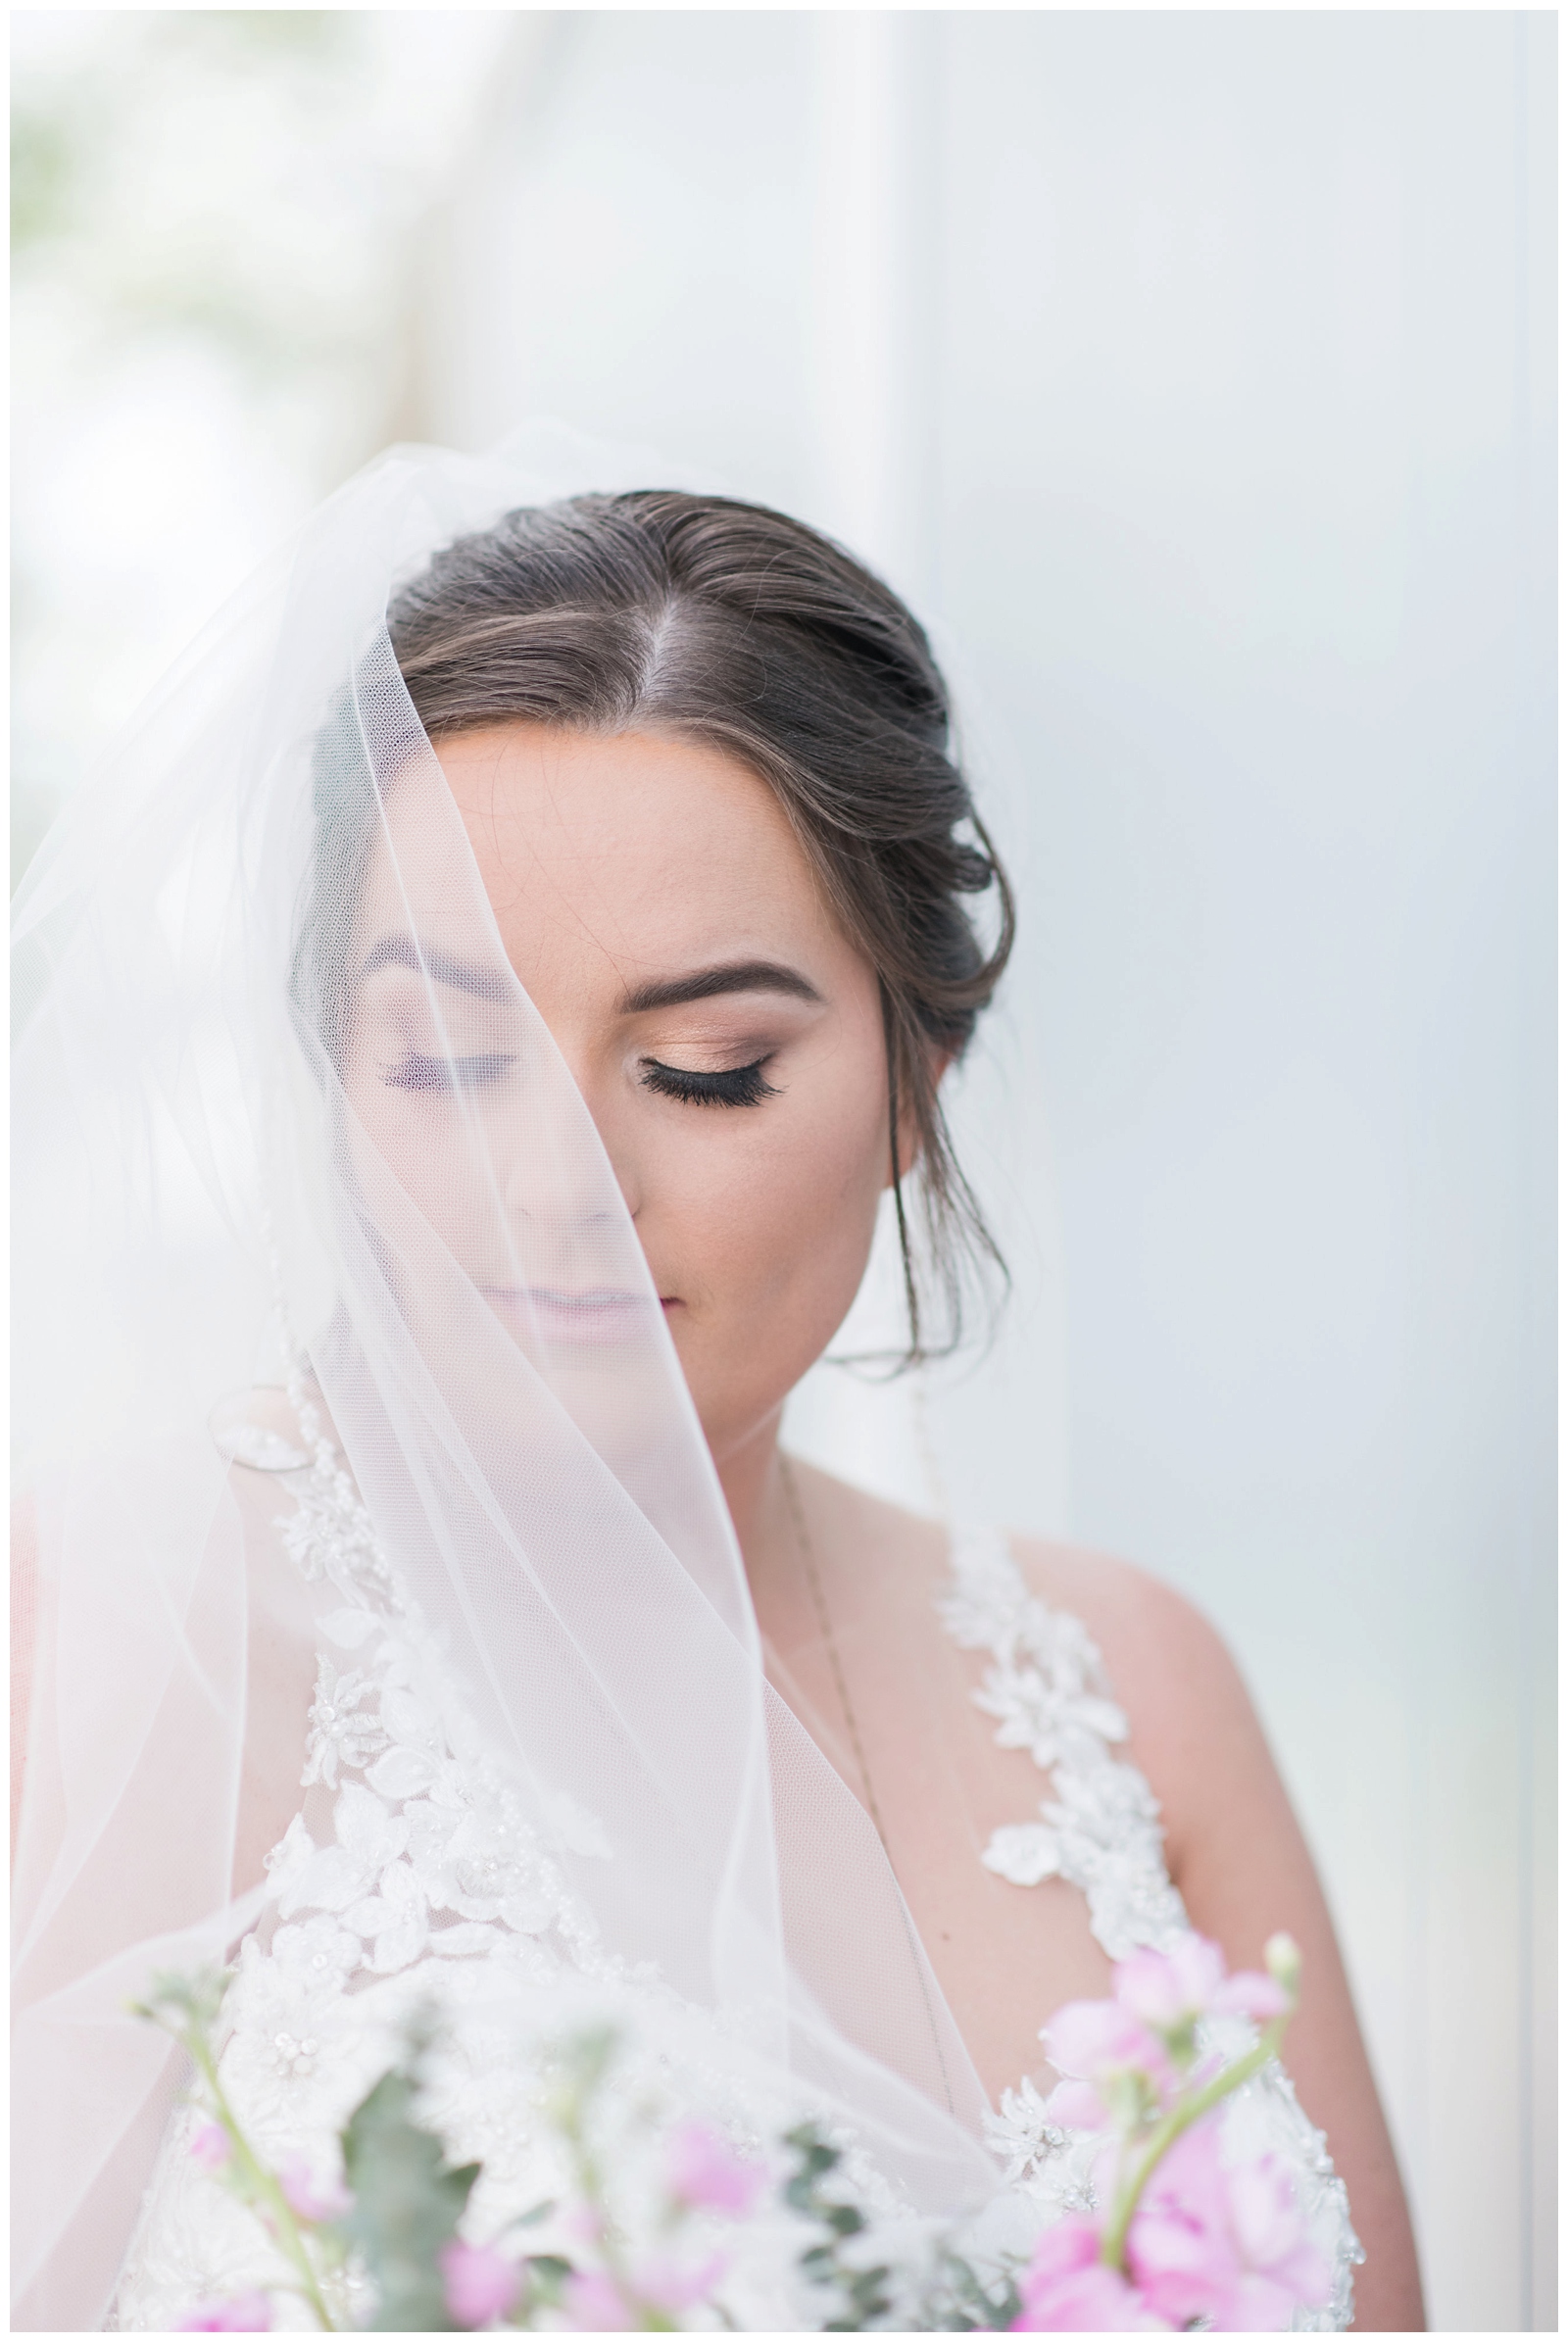 bridal portrait with veil and Madison James Designer wedding dress by Pipers Photography